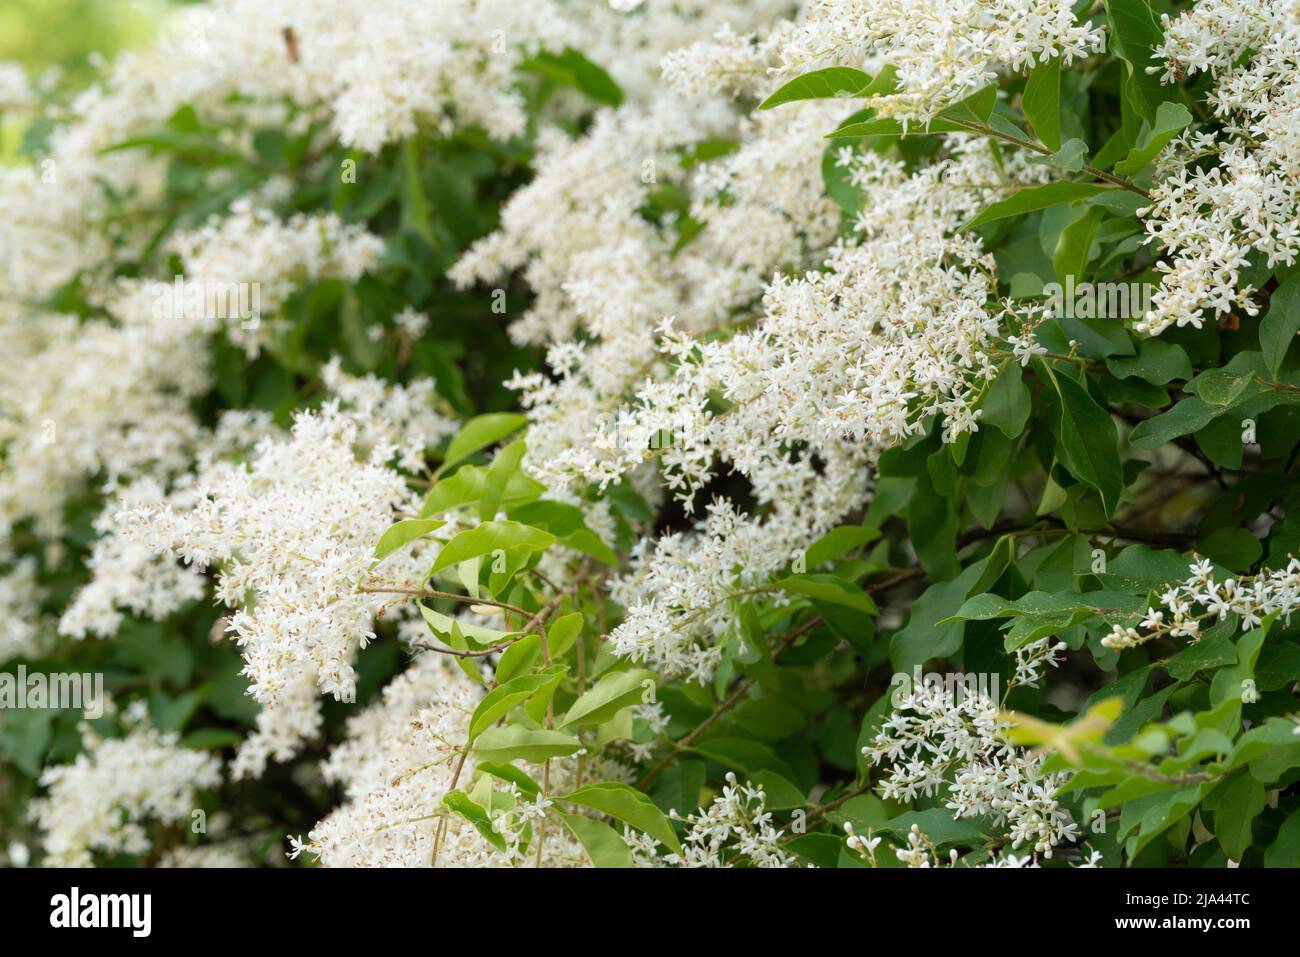 Italy, Lombardy, Chinese Privet Flowers, Ligustrum Sinense Stock Photo